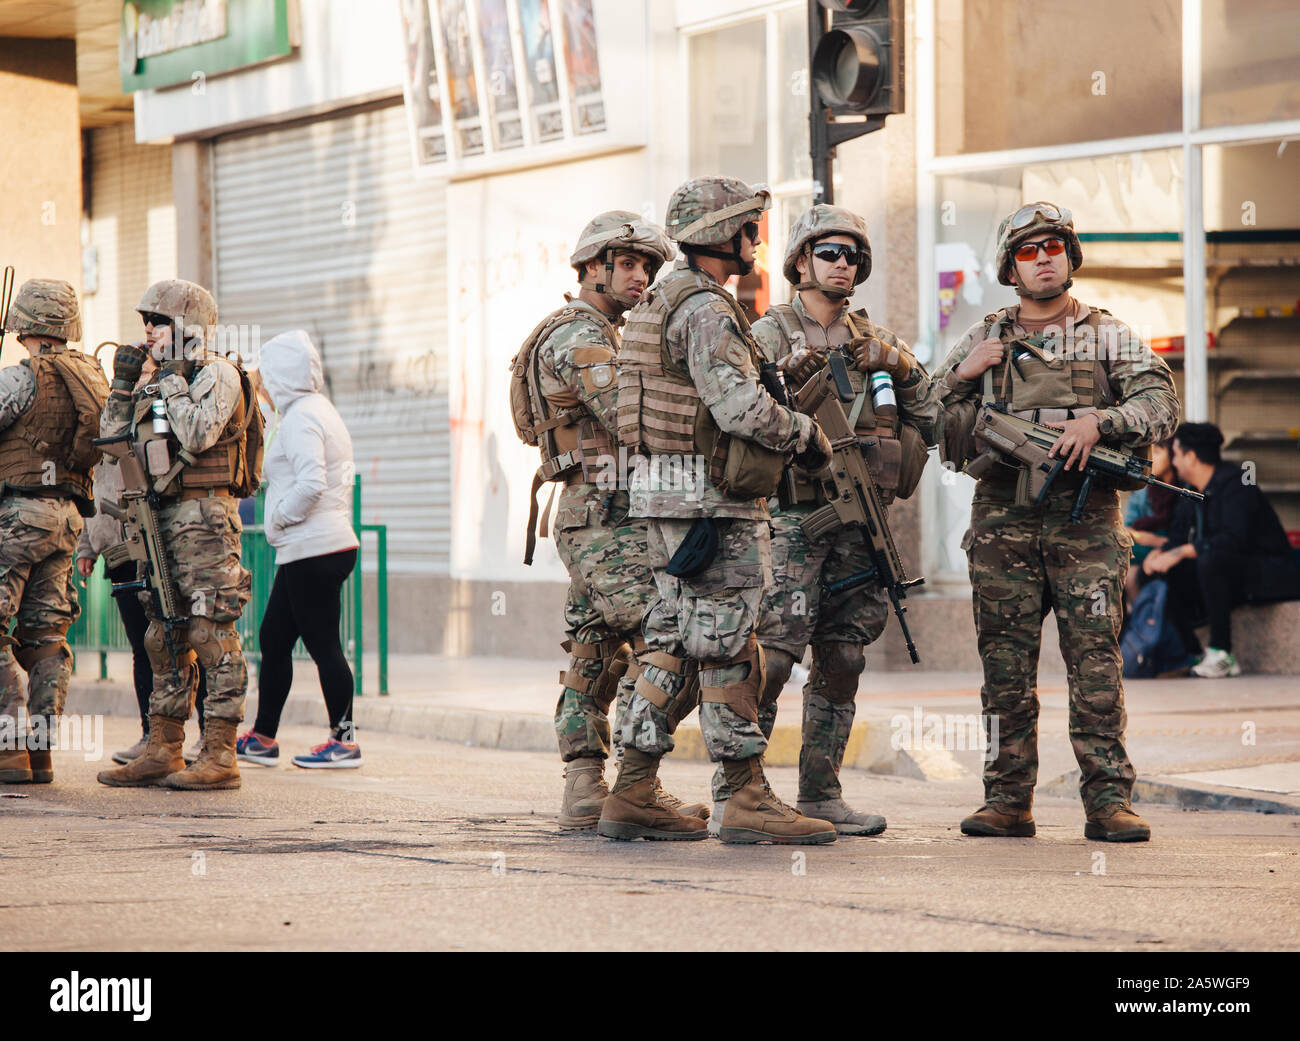 QUILPUÉ, CHILE - OCTOBER 20, 2019 - Military take the streets under the State of Emergency during protests of the 'Evade' movement against the governm Stock Photo